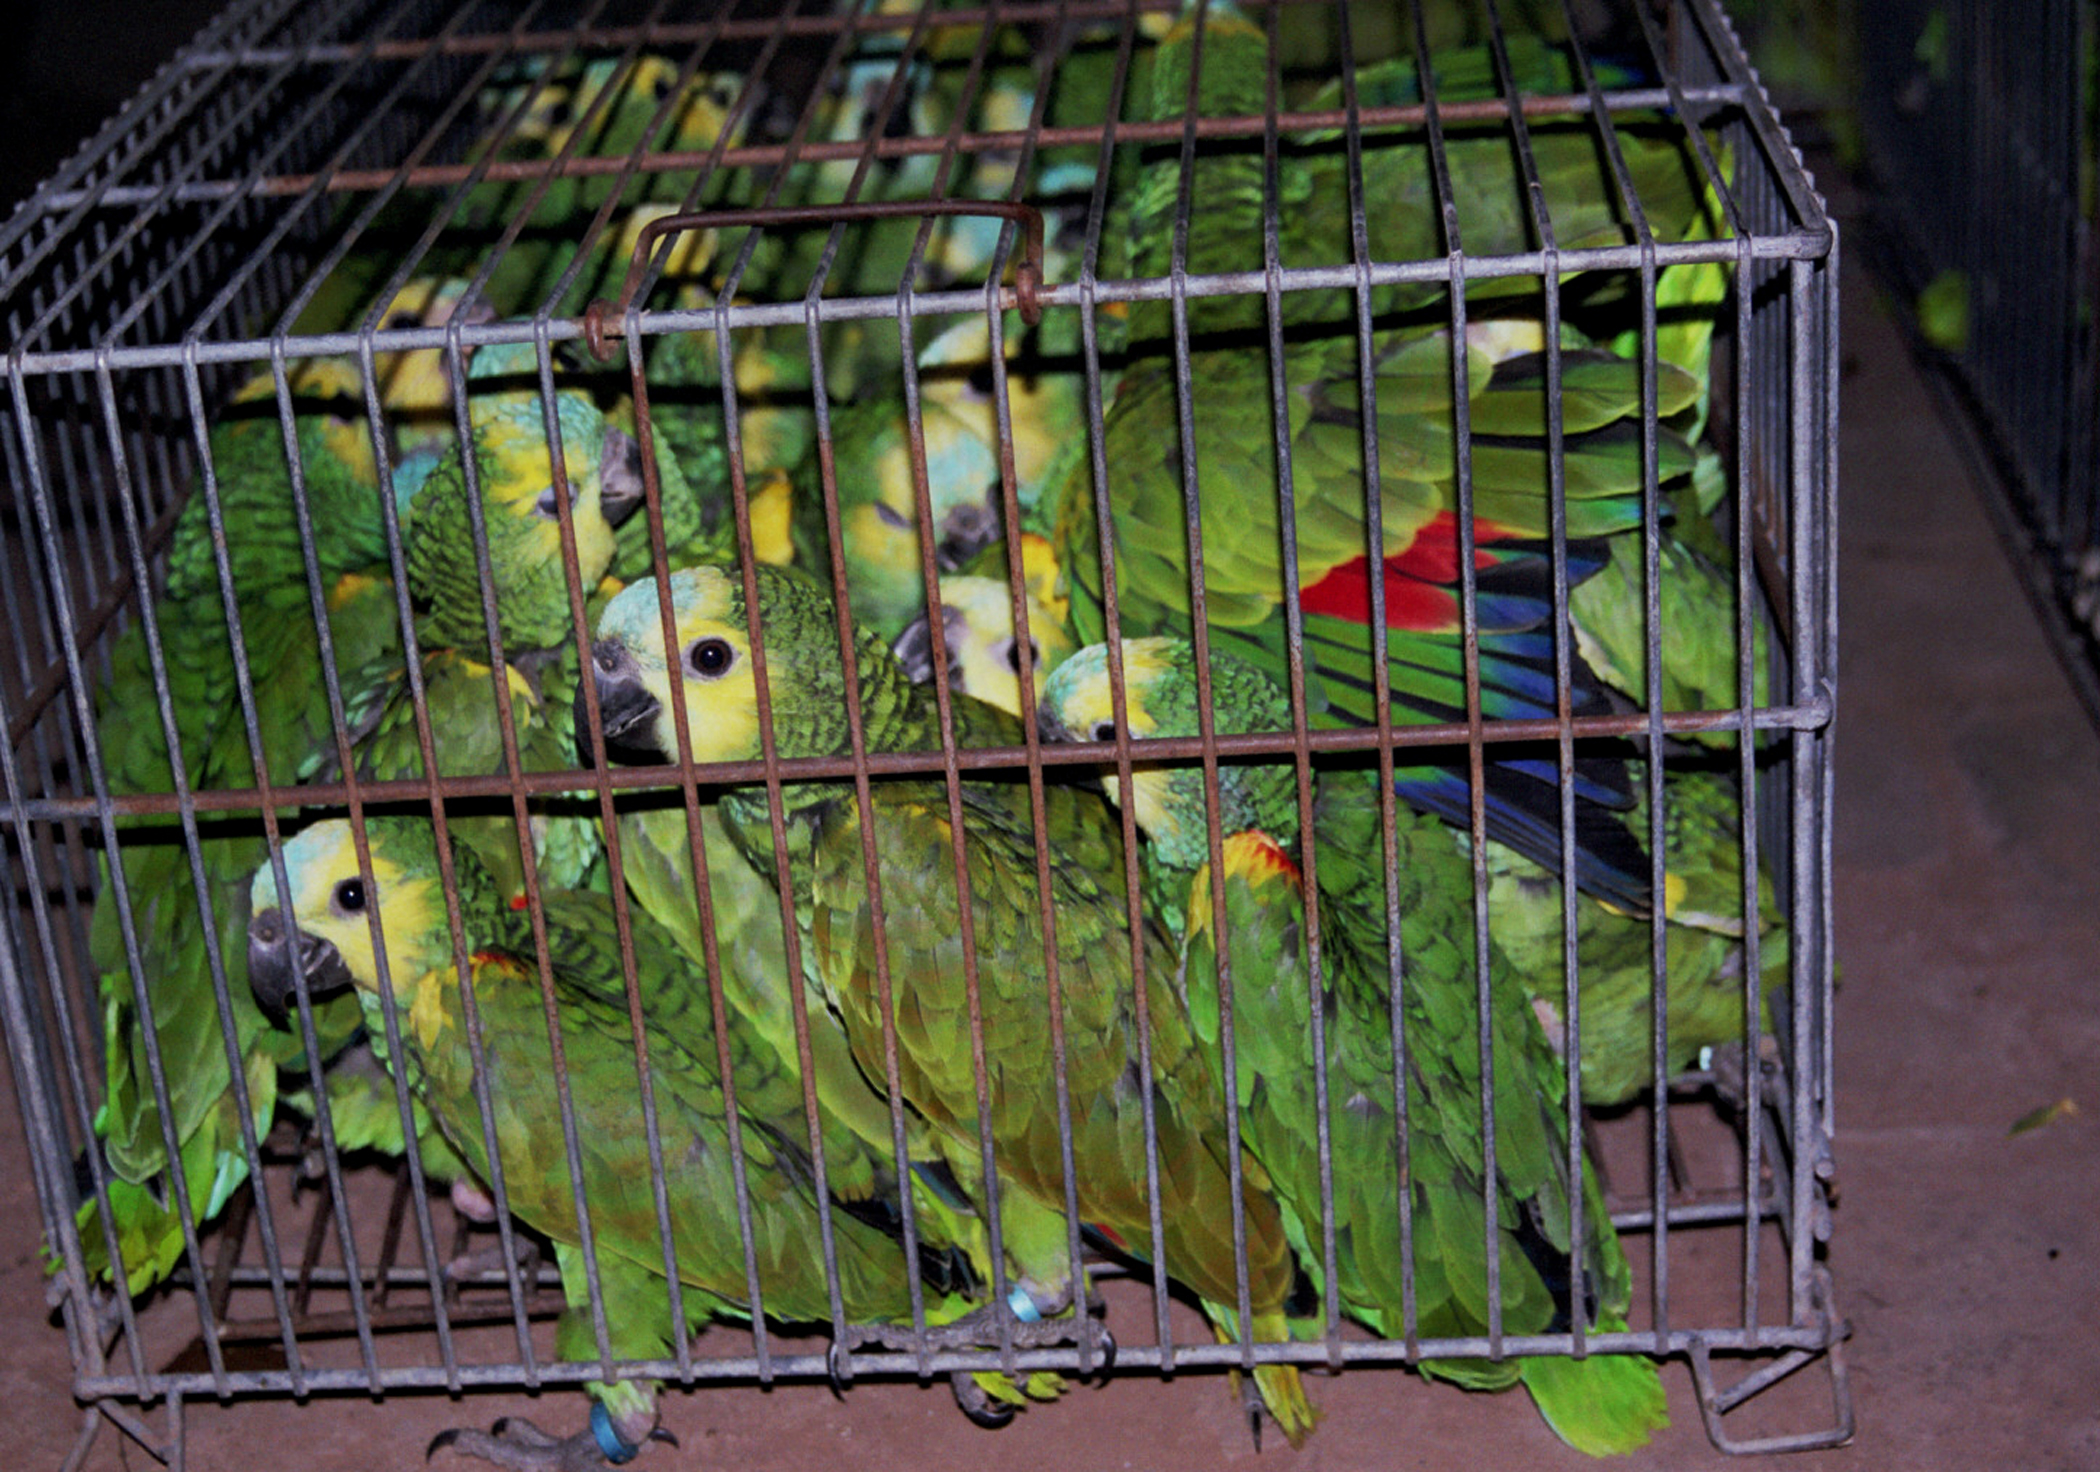 Parrots are the pets. Illegal trade of animals of Parrots. Обложка для ВК сообщества с птицами жако ар. Lots of Parrots to Cut. The illegal Pet trade.